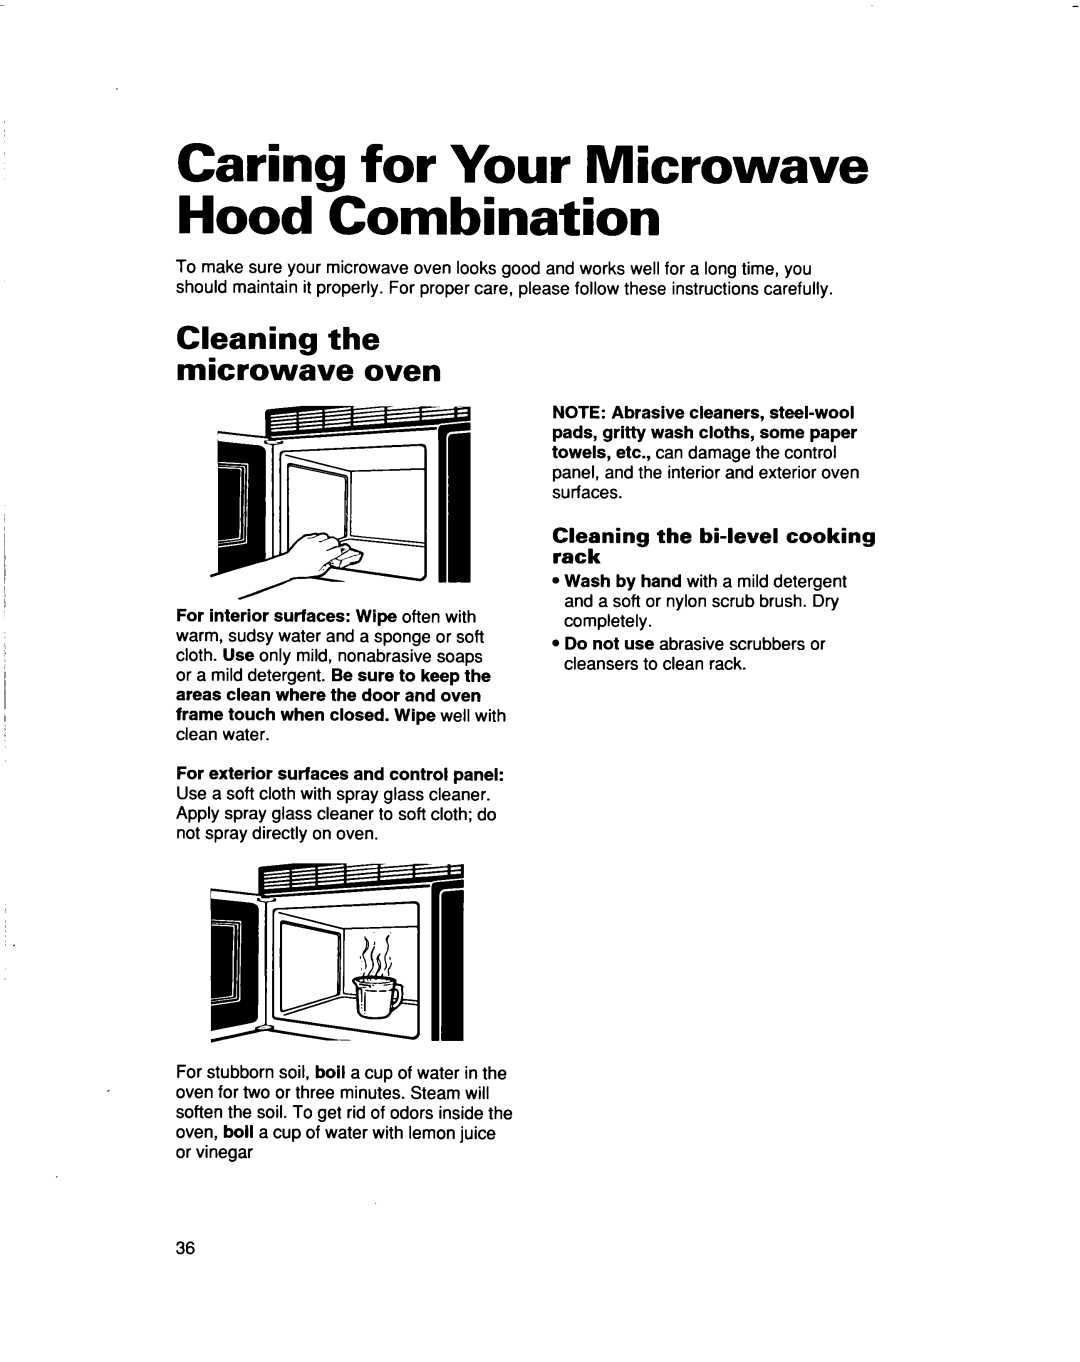 Whirlpool MHEI IRD Caring for Your Microwave Hood Combination, Cleaning the microwave oven, CEiE ning the bi-levelcooking 